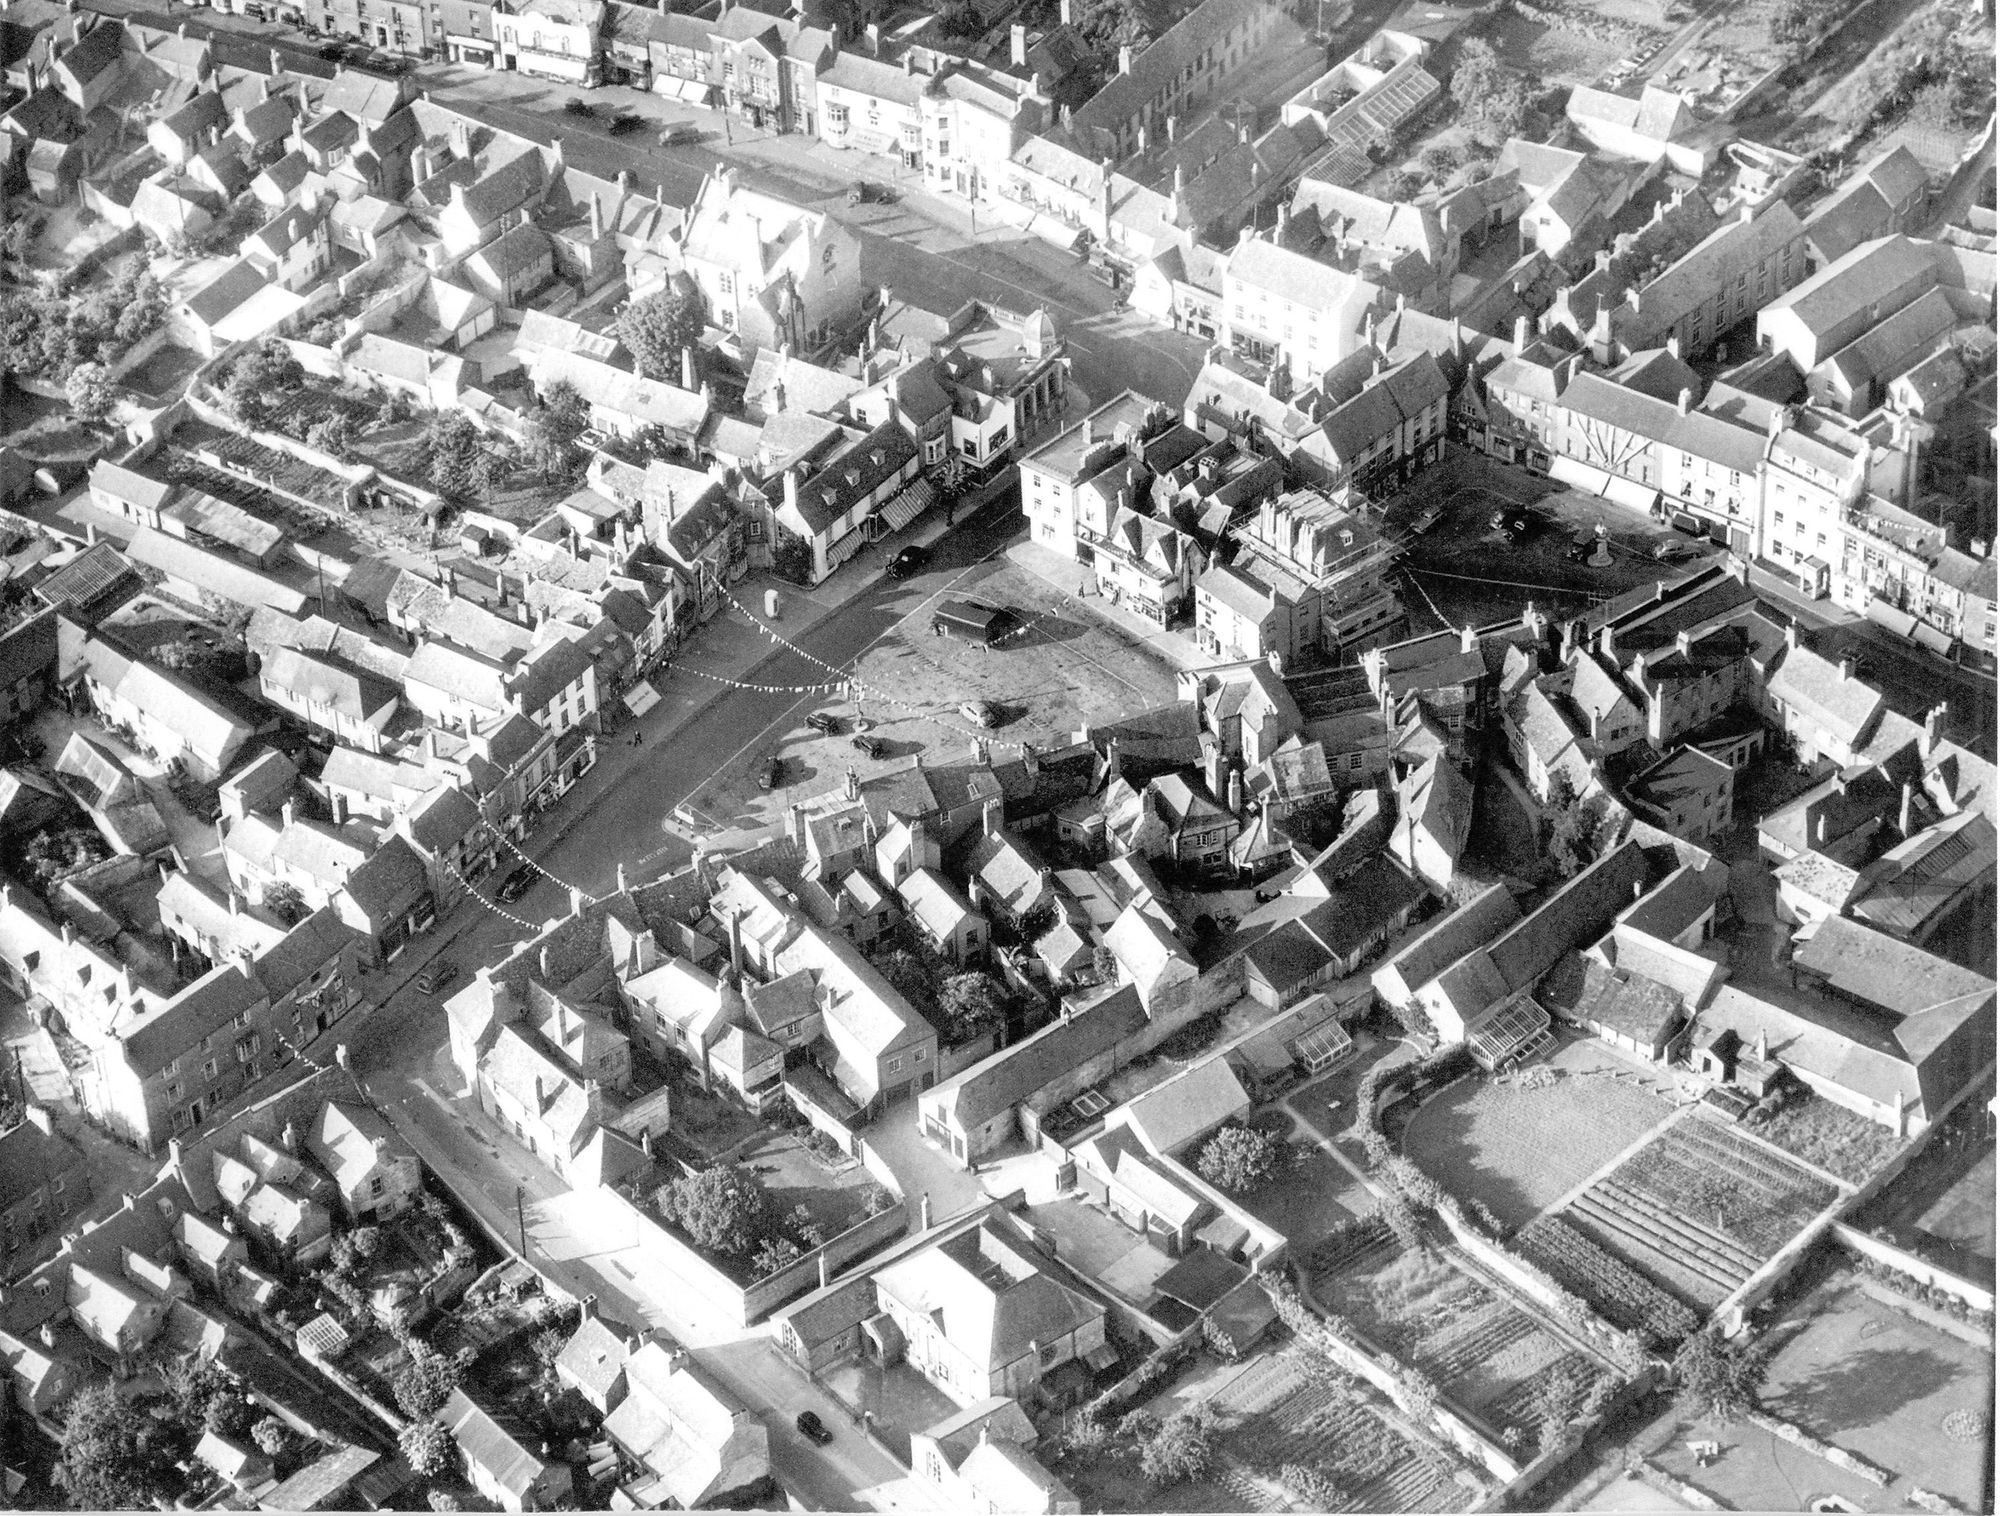 Aerial view of Market Square in 1953 showing the bunting and decorations hung ready for the Coronation celebrations.